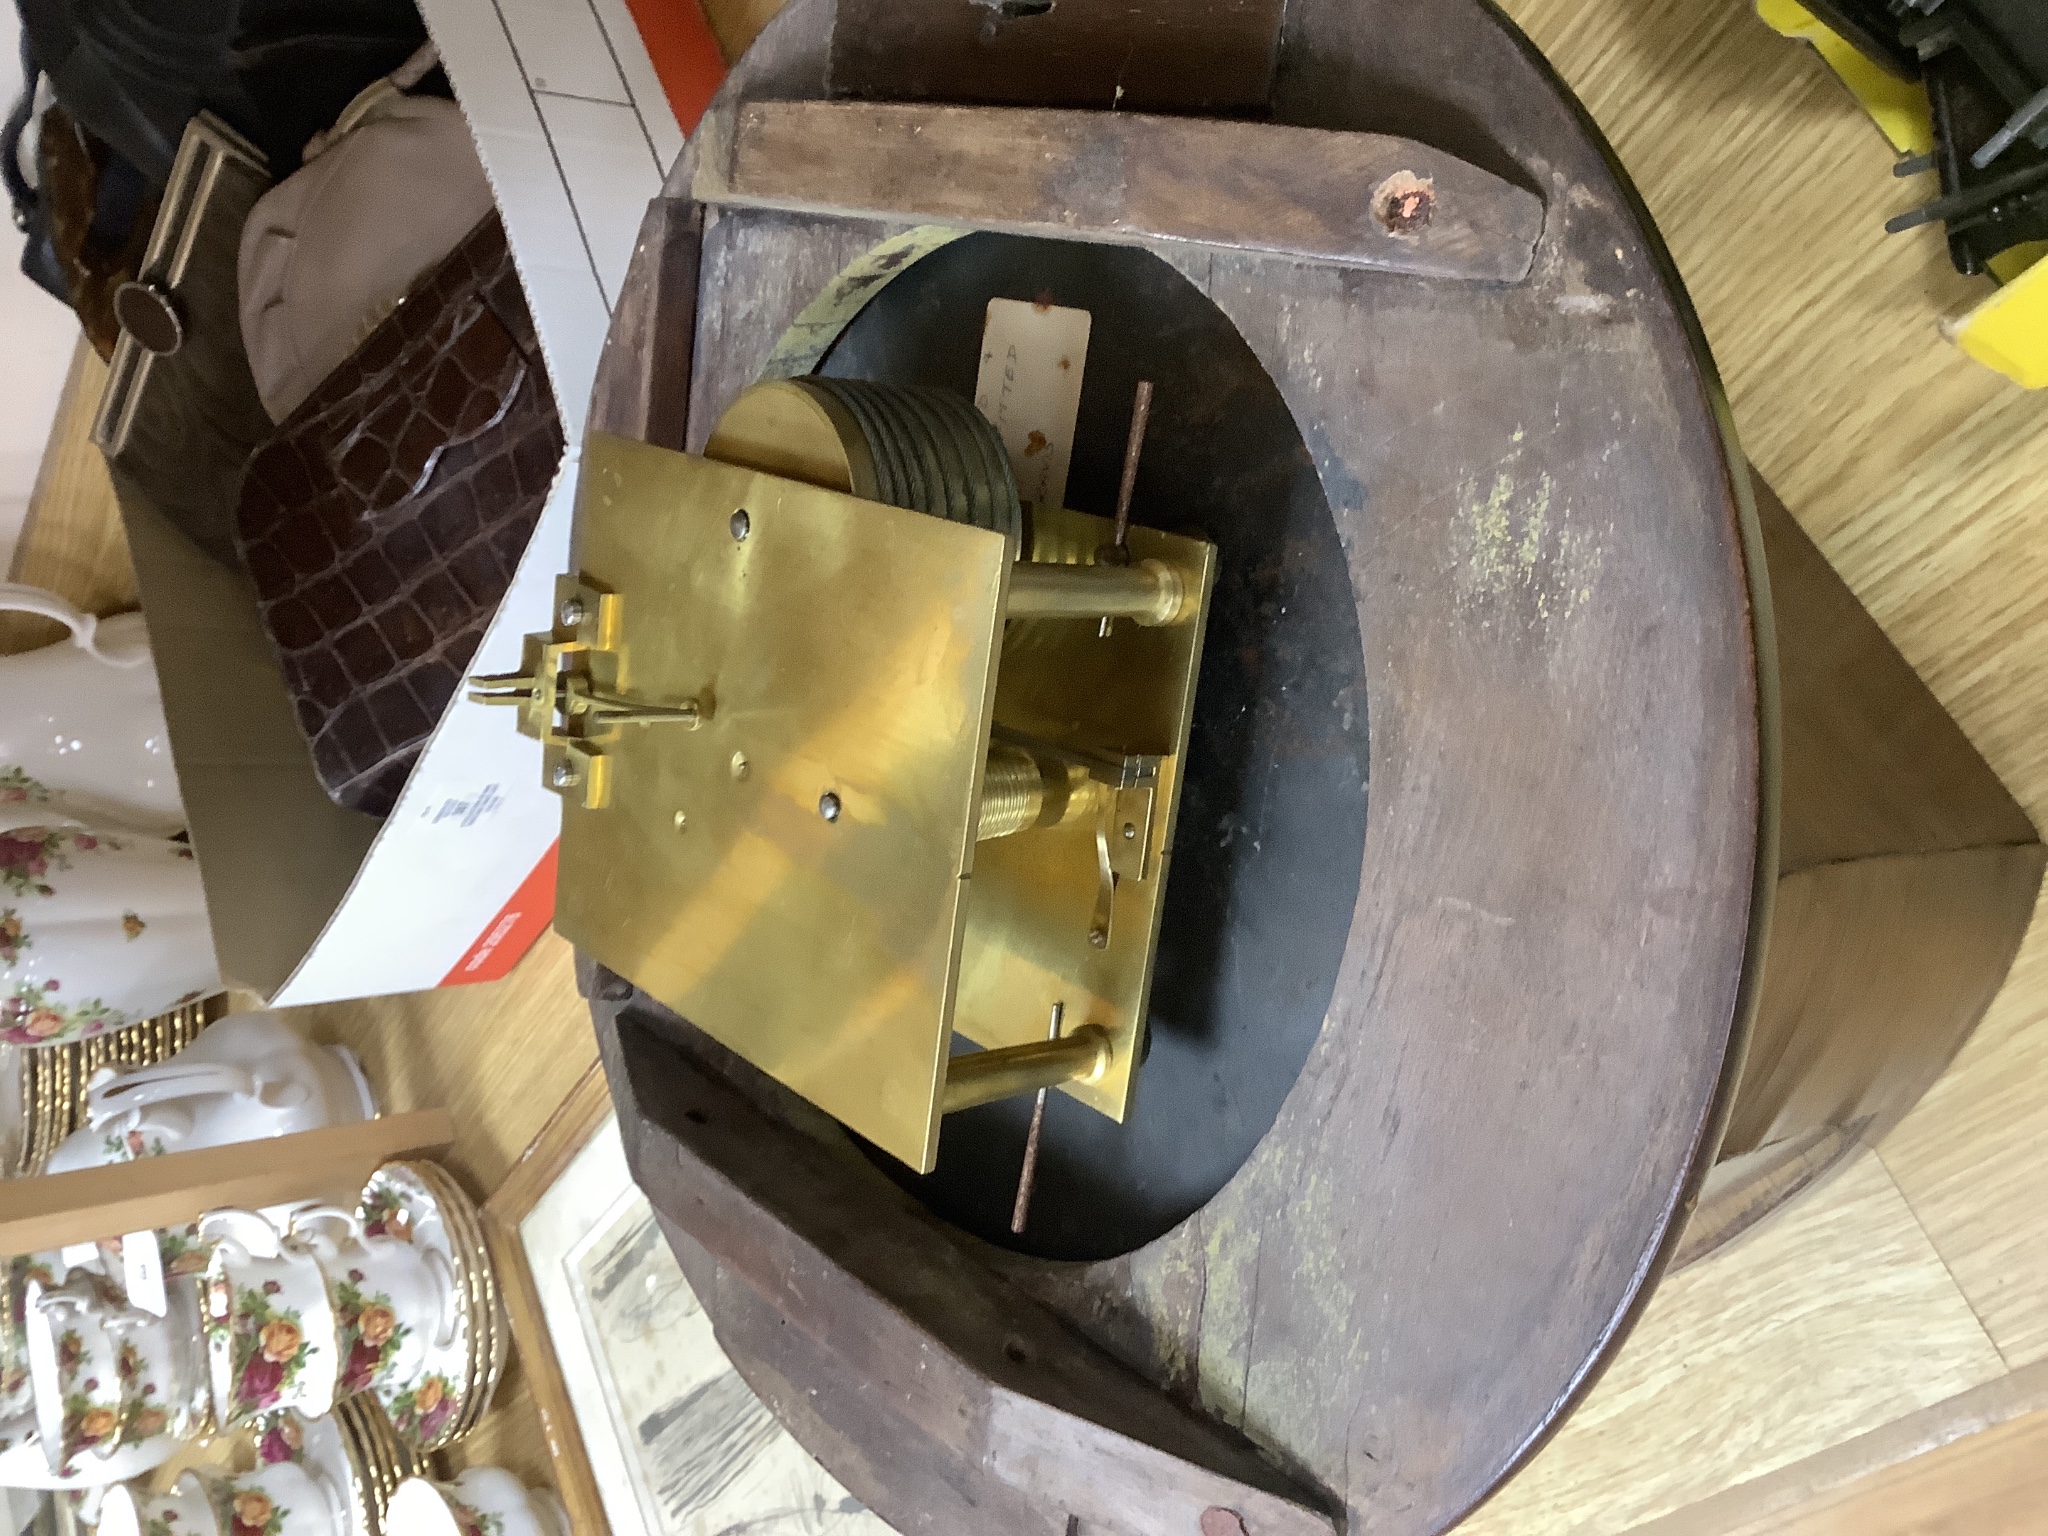 A late Victorian dial clock with key and pendulum, 36cm diameter, Single fusee movement, box case later